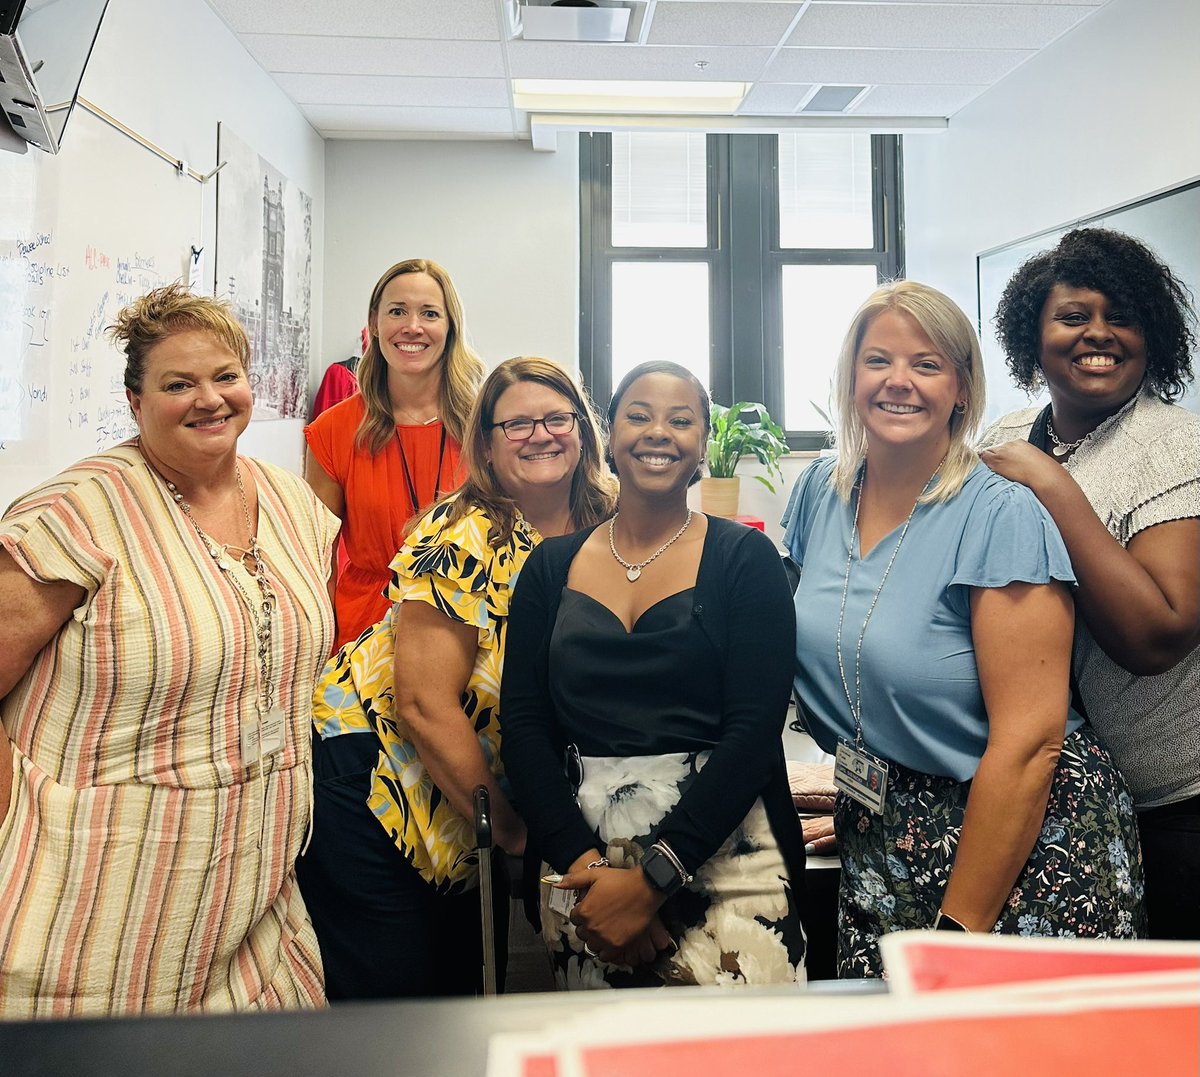 Thank you @drj_williams for opening up your beautiful building and space @HughesSTEMHS to the ELA Team today. We appreciate it! #WEareCPS @pcocklin @esienicki @MsJSmithELA!